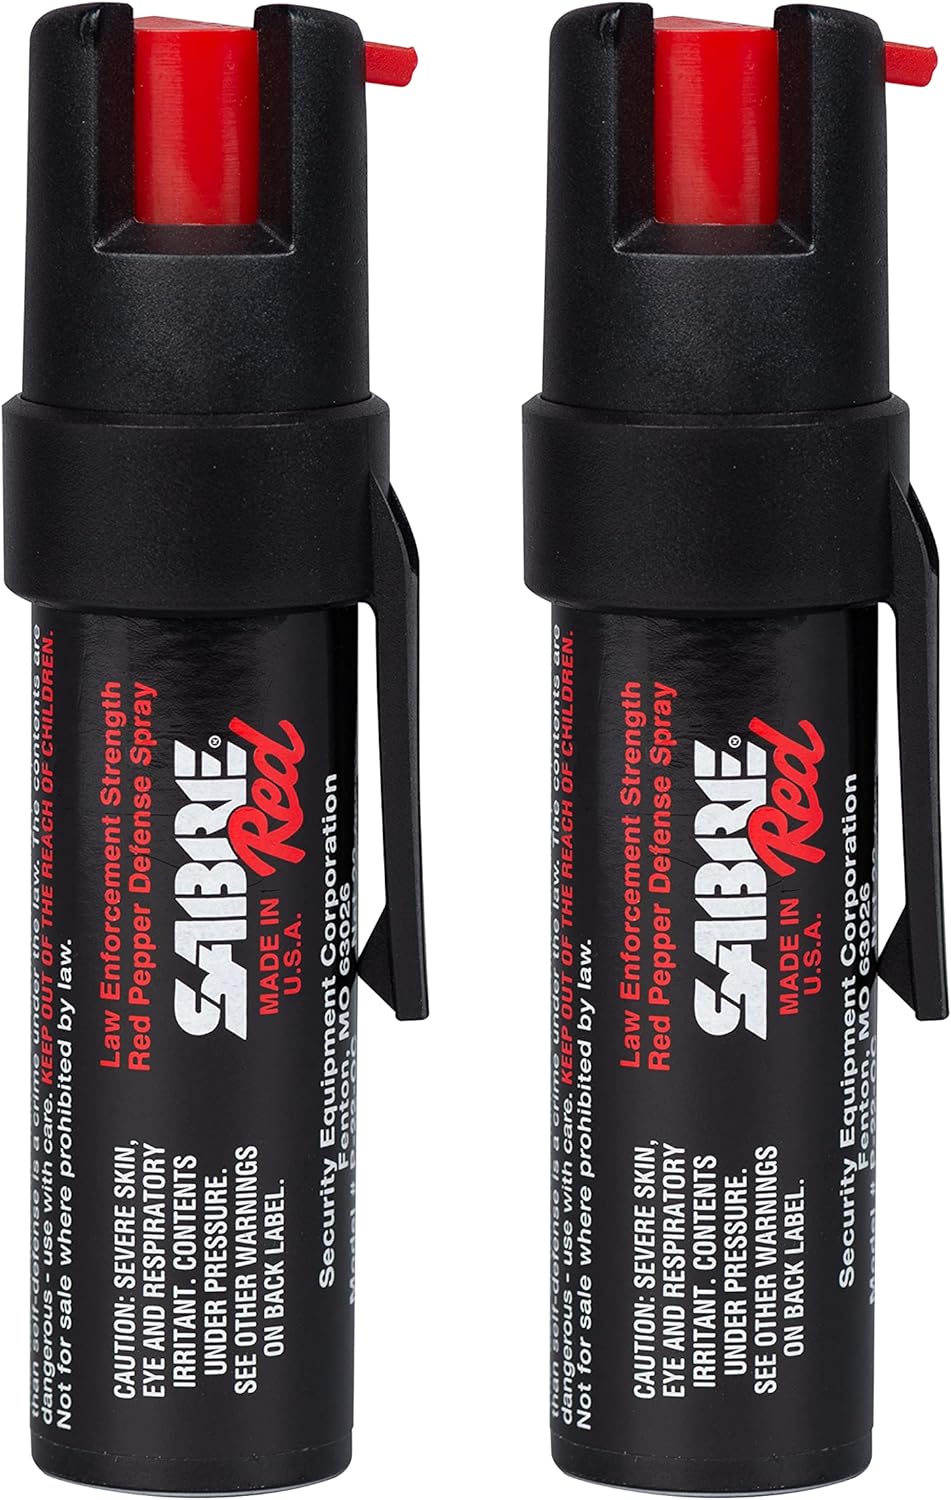 $10: 2-Pack 0.67-Oz SABRE RED Compact Pepper Spray (Black) at Amazon